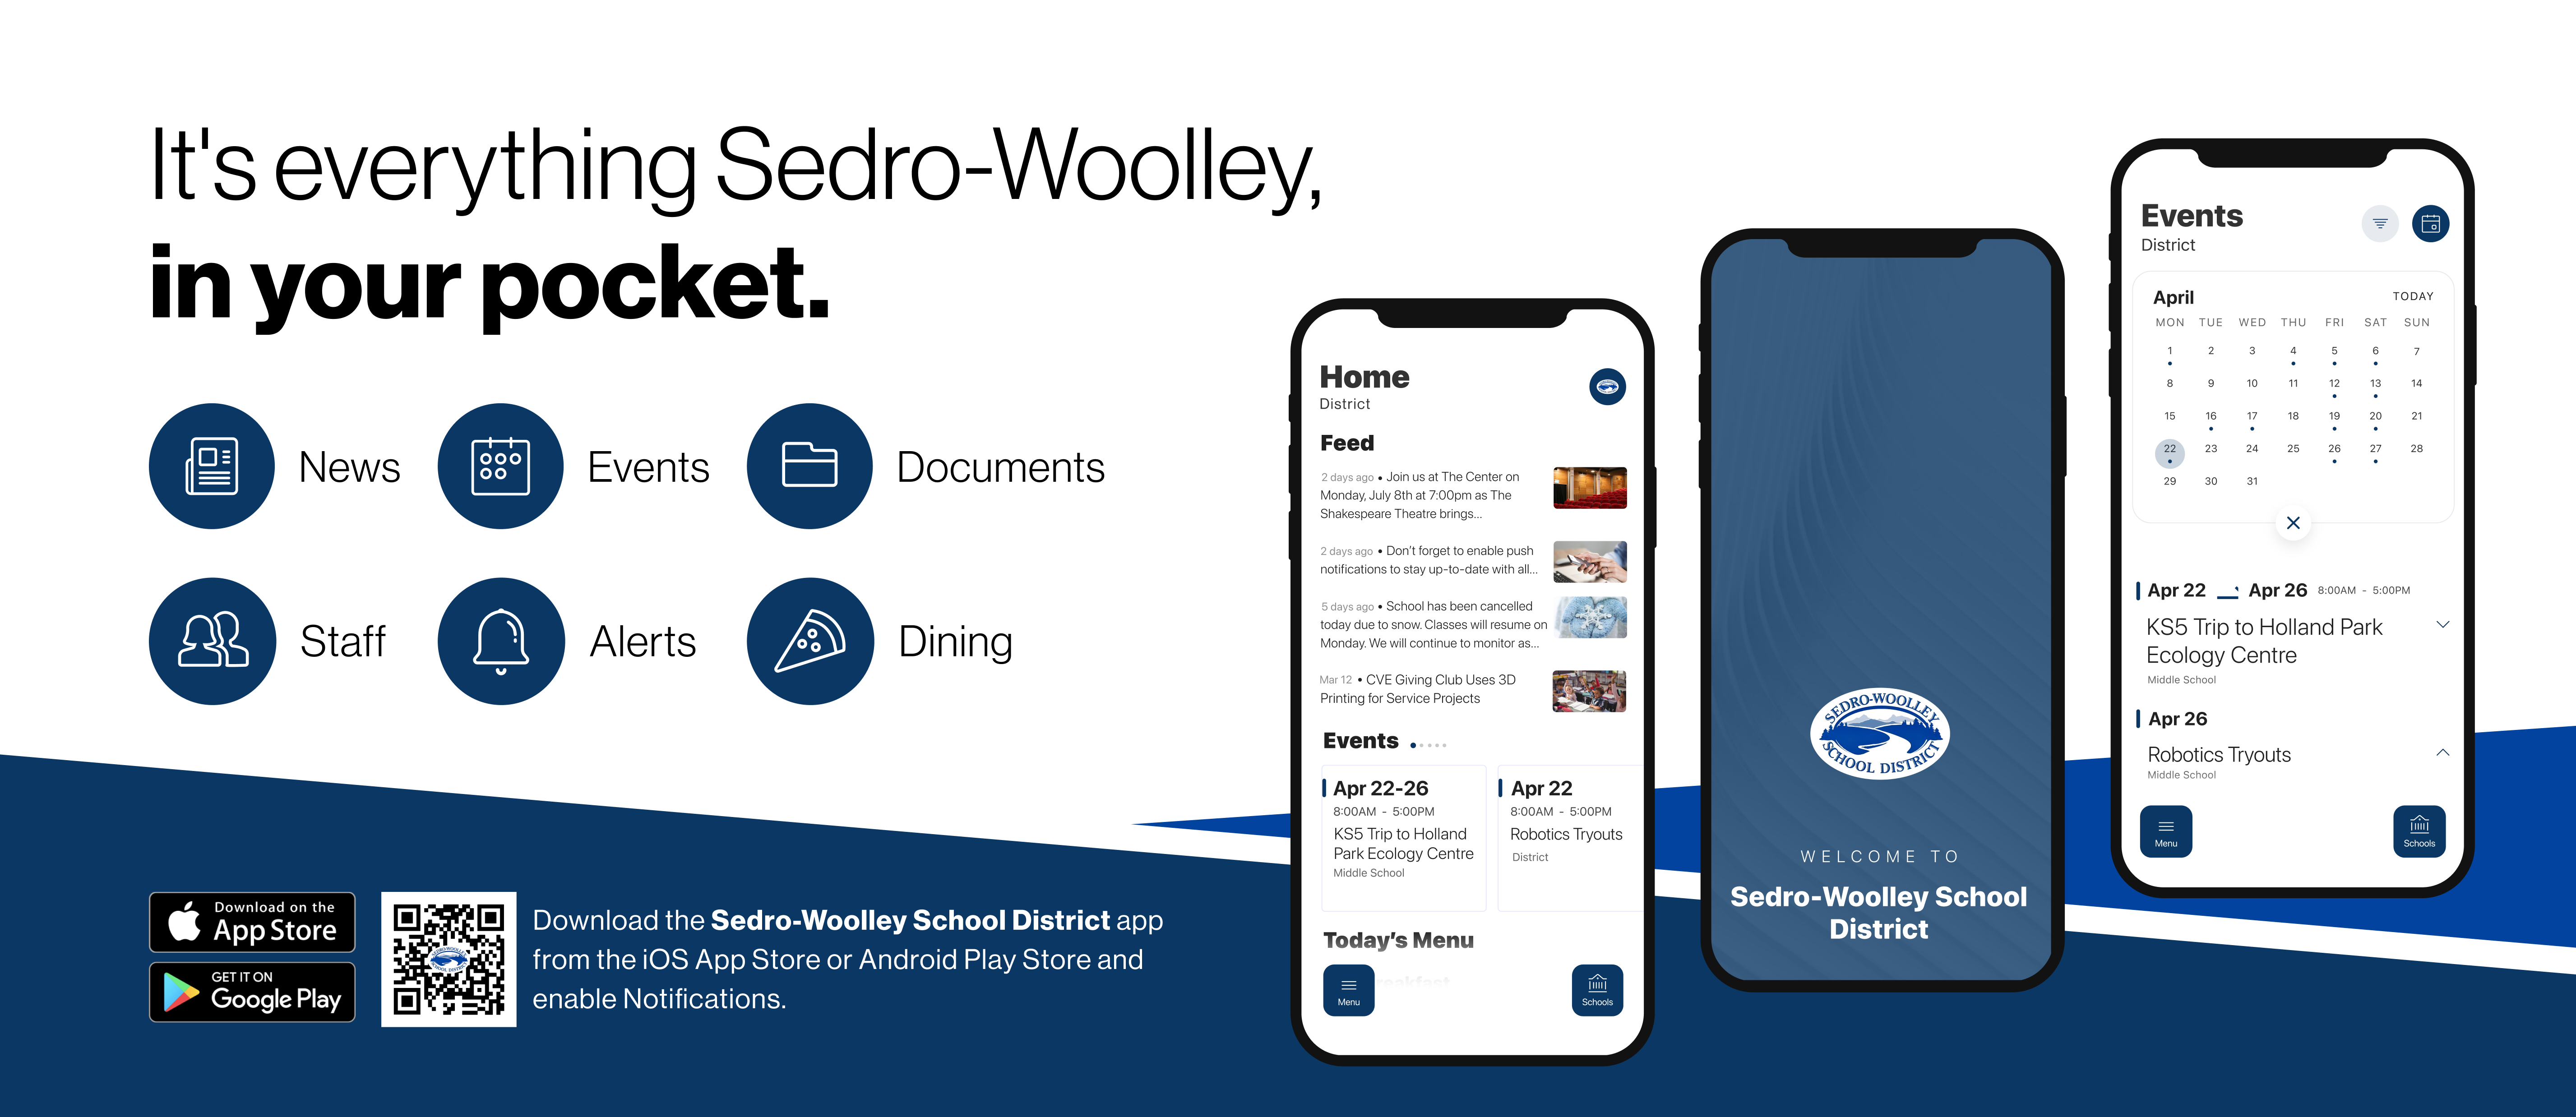 It's everything sedro woolley, in your pocket.